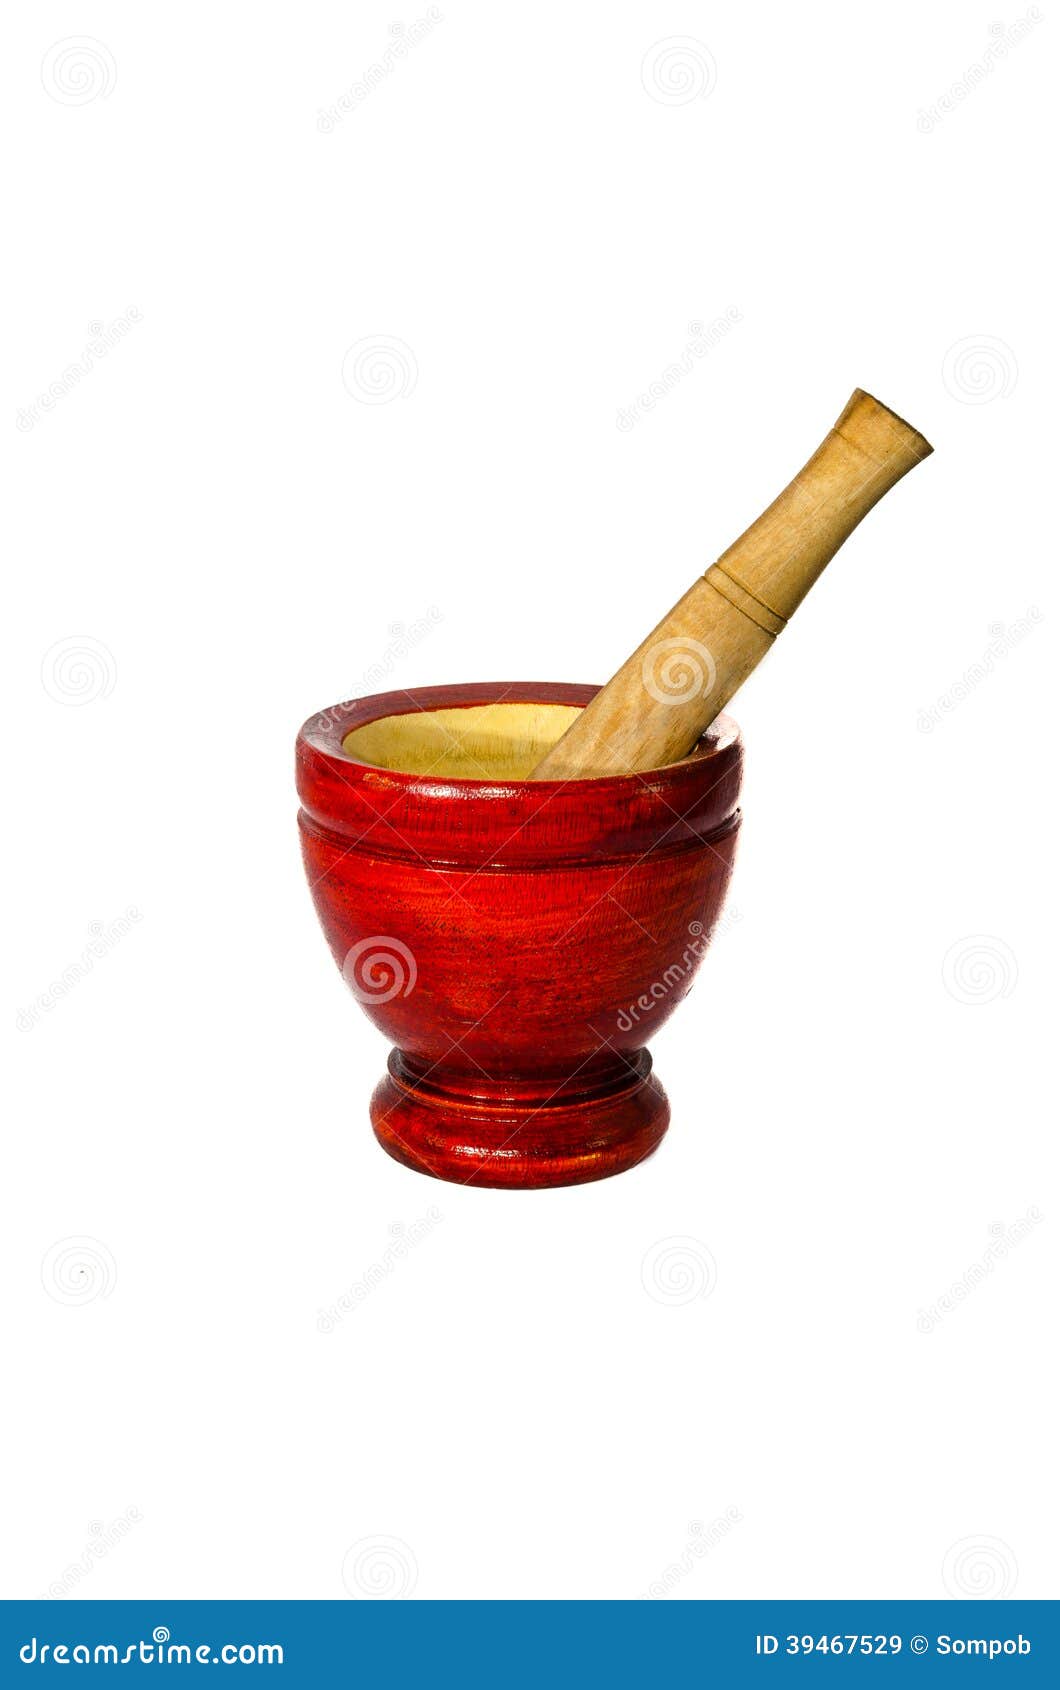 wooden pounder and pestle